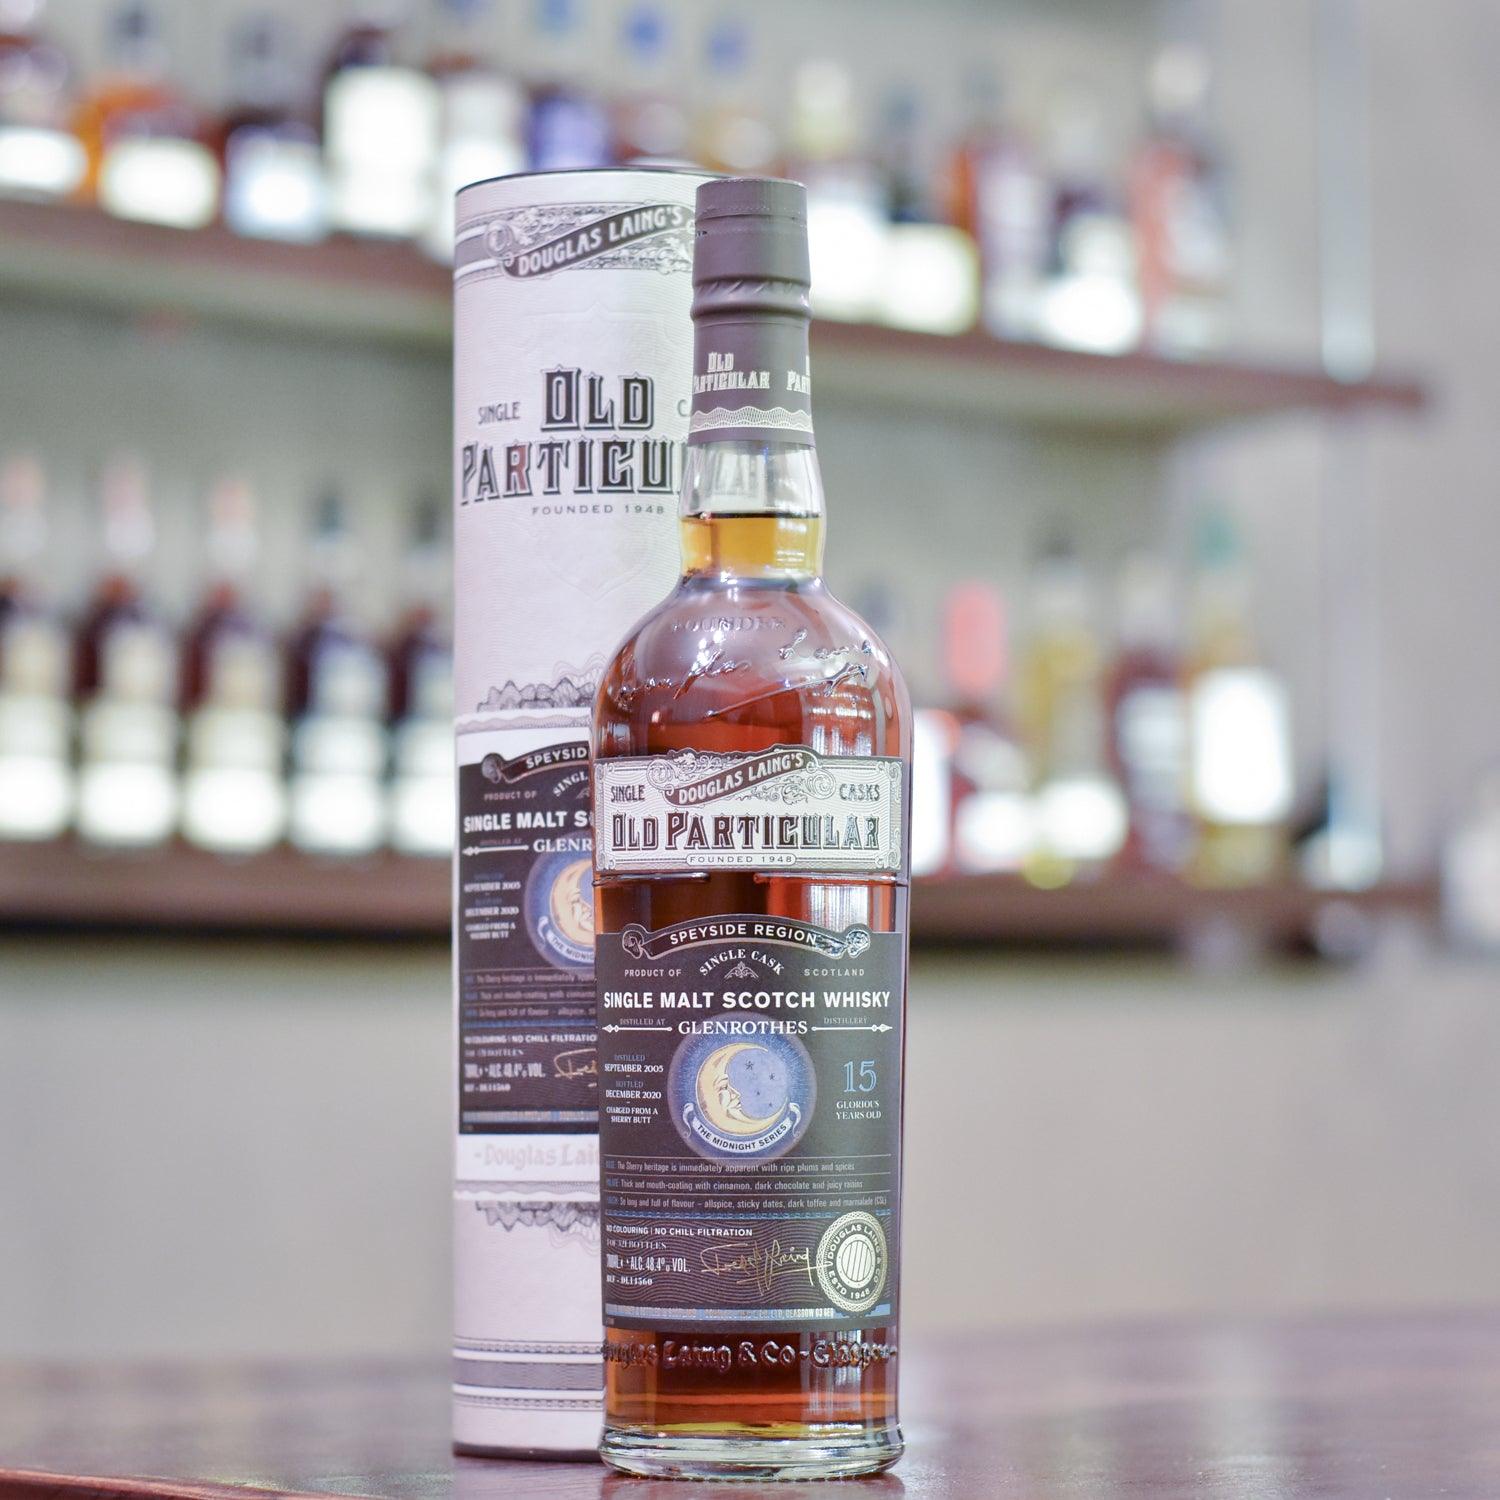 Old Particular - Glenrothes 15 Year Old 2005 The Midnight Series Cask DL 14560 - The Rare Malt